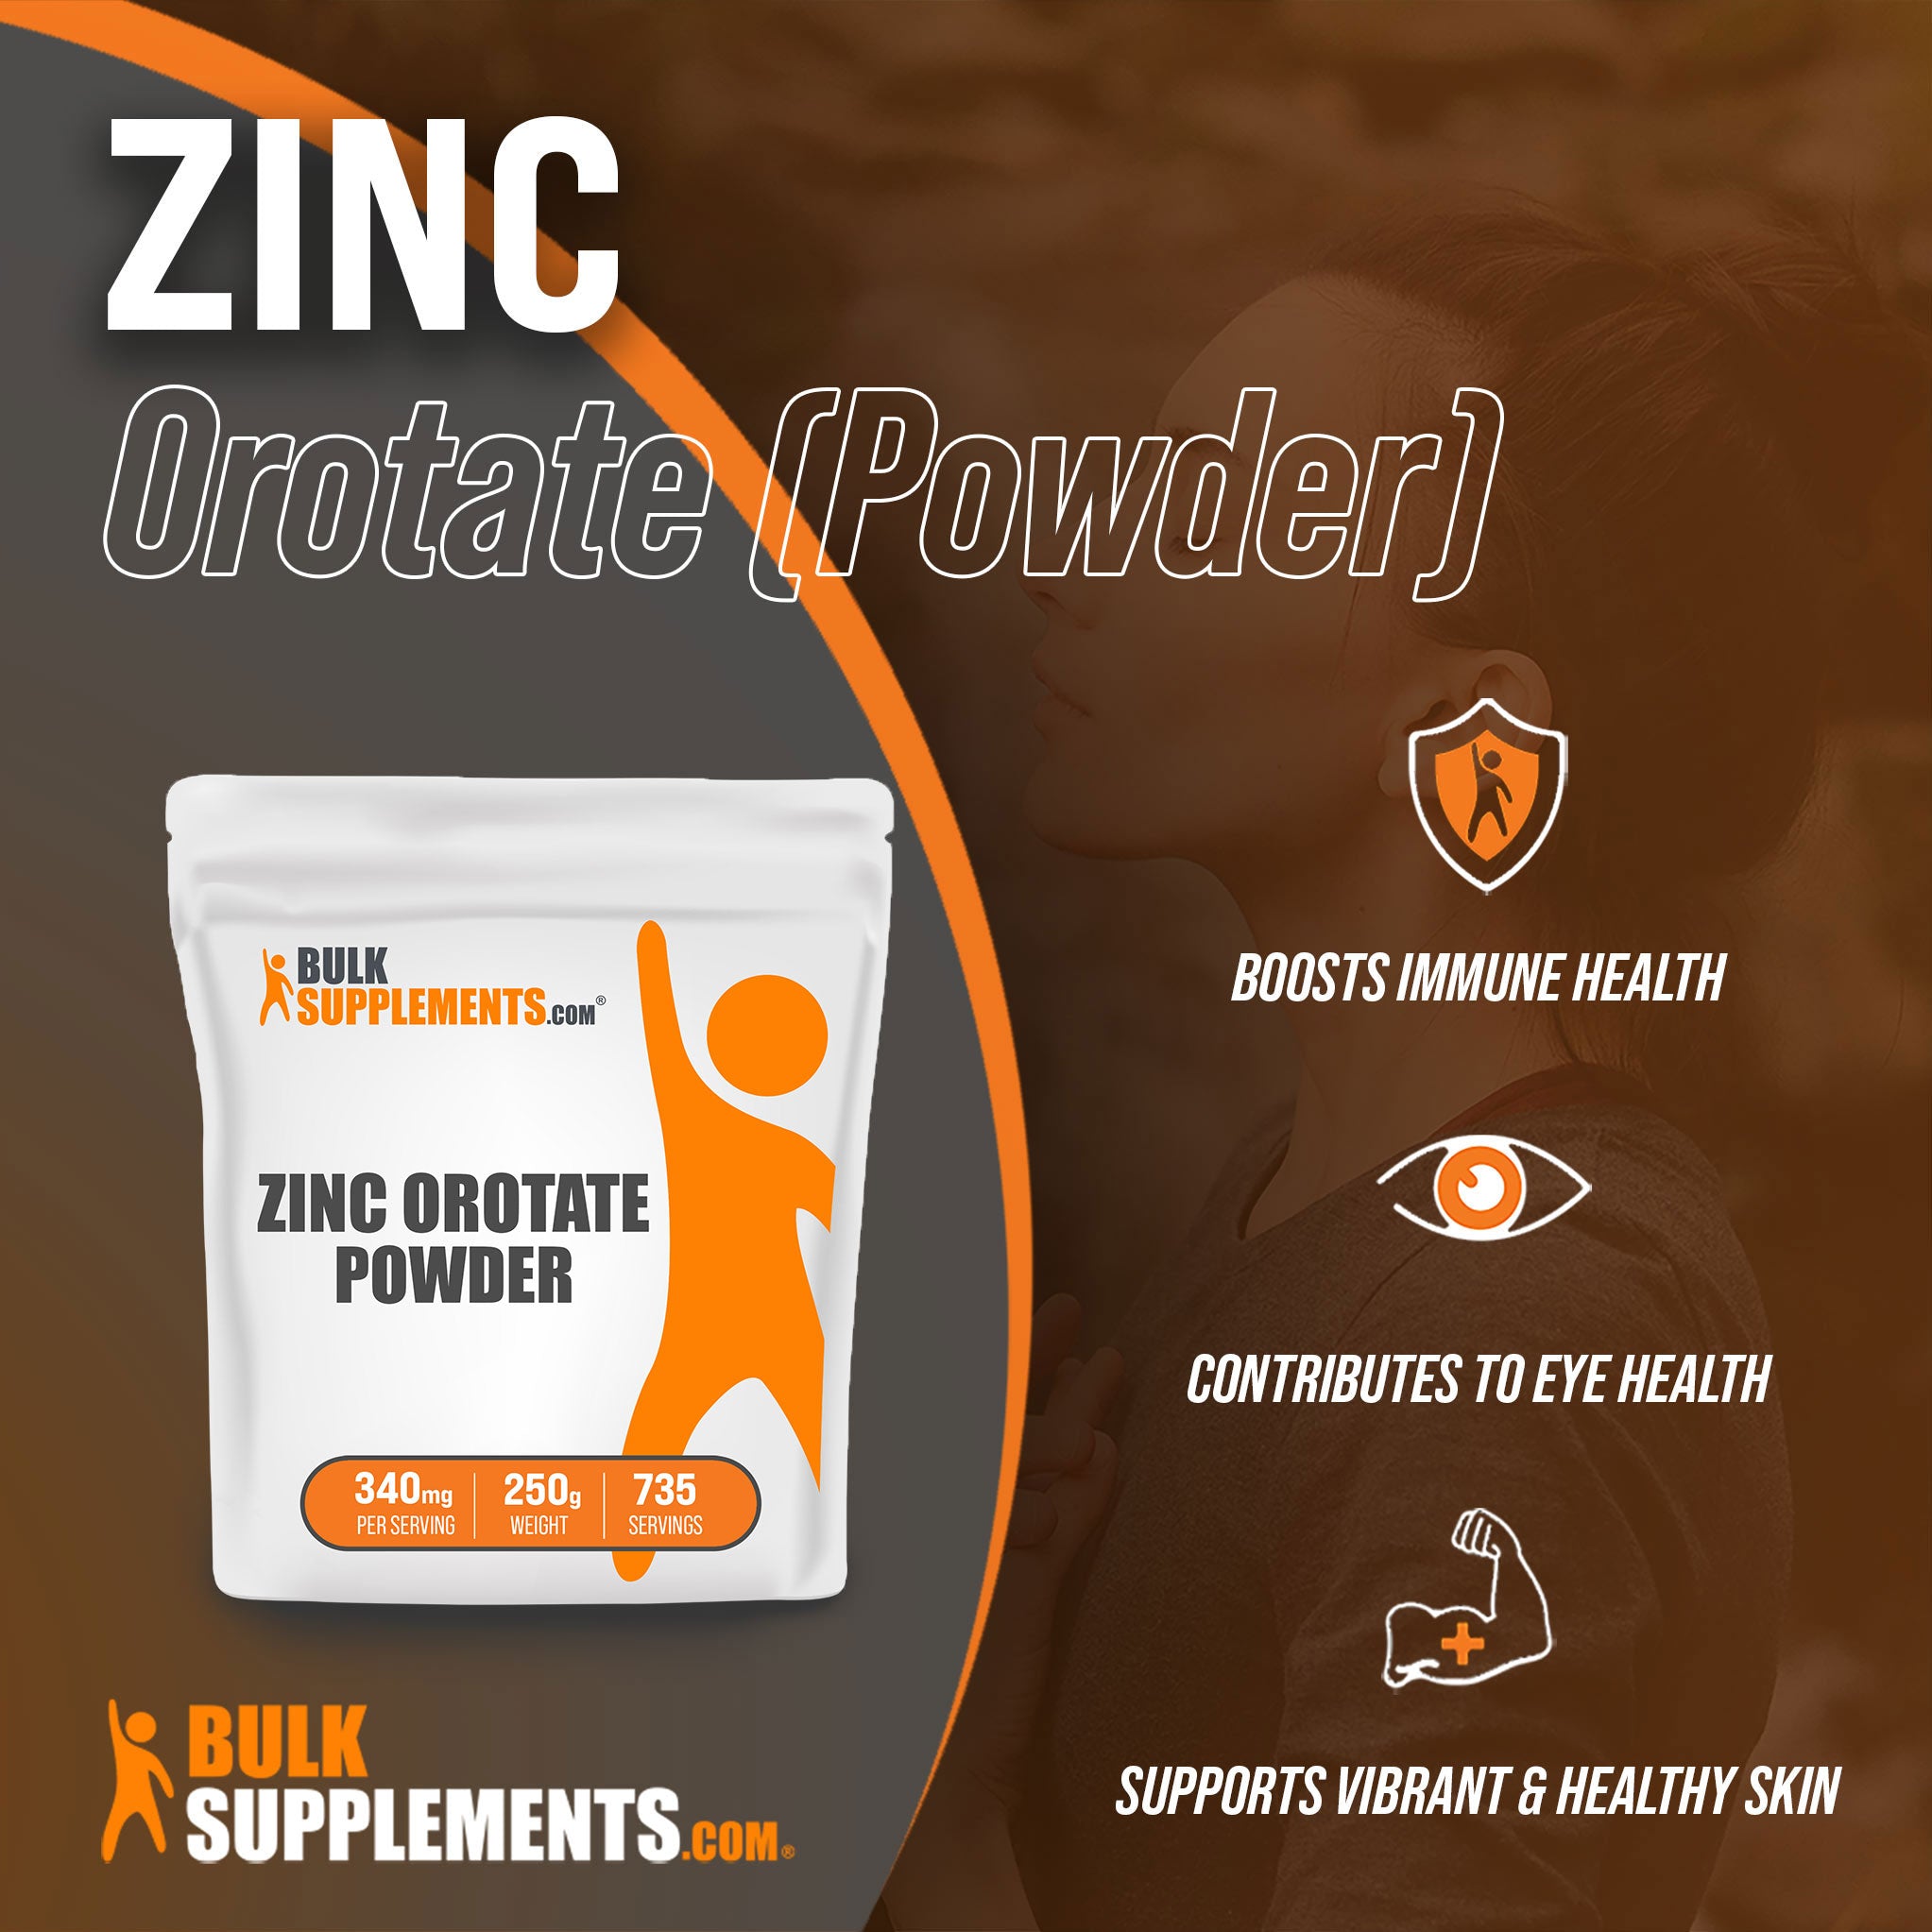 Benefits of Zinc Orotate: boosts immune health, contributes to eye health, supports vibrant and healthy skin